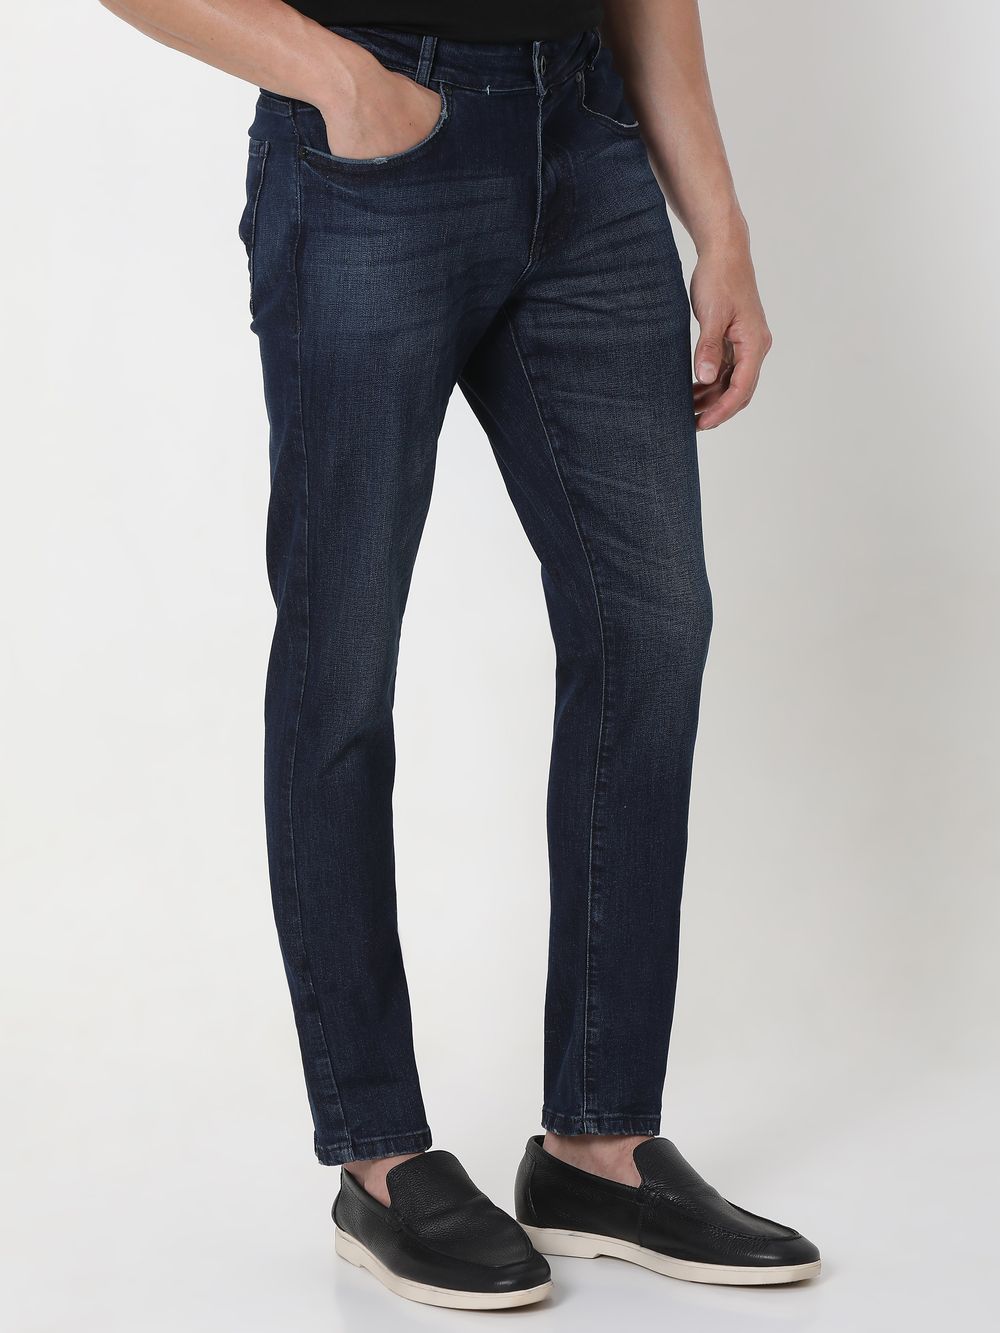 Tinted Skinny Fit Originals Stretch Jeans